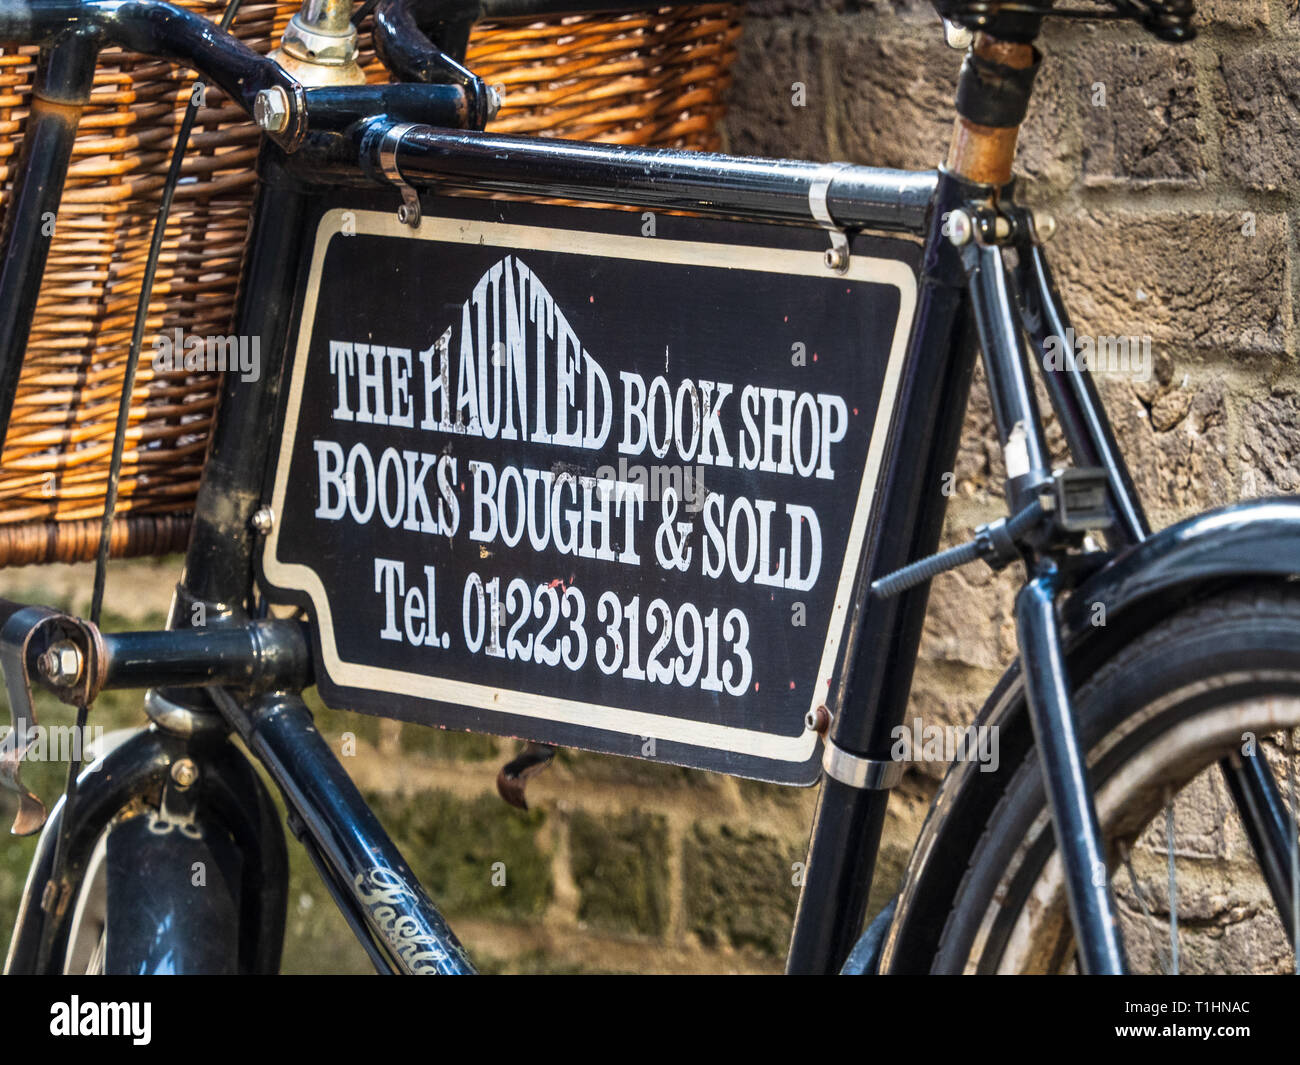 Vintage Bike outside the Haunted Book Shop in Central Cambridge UK Stock Photo